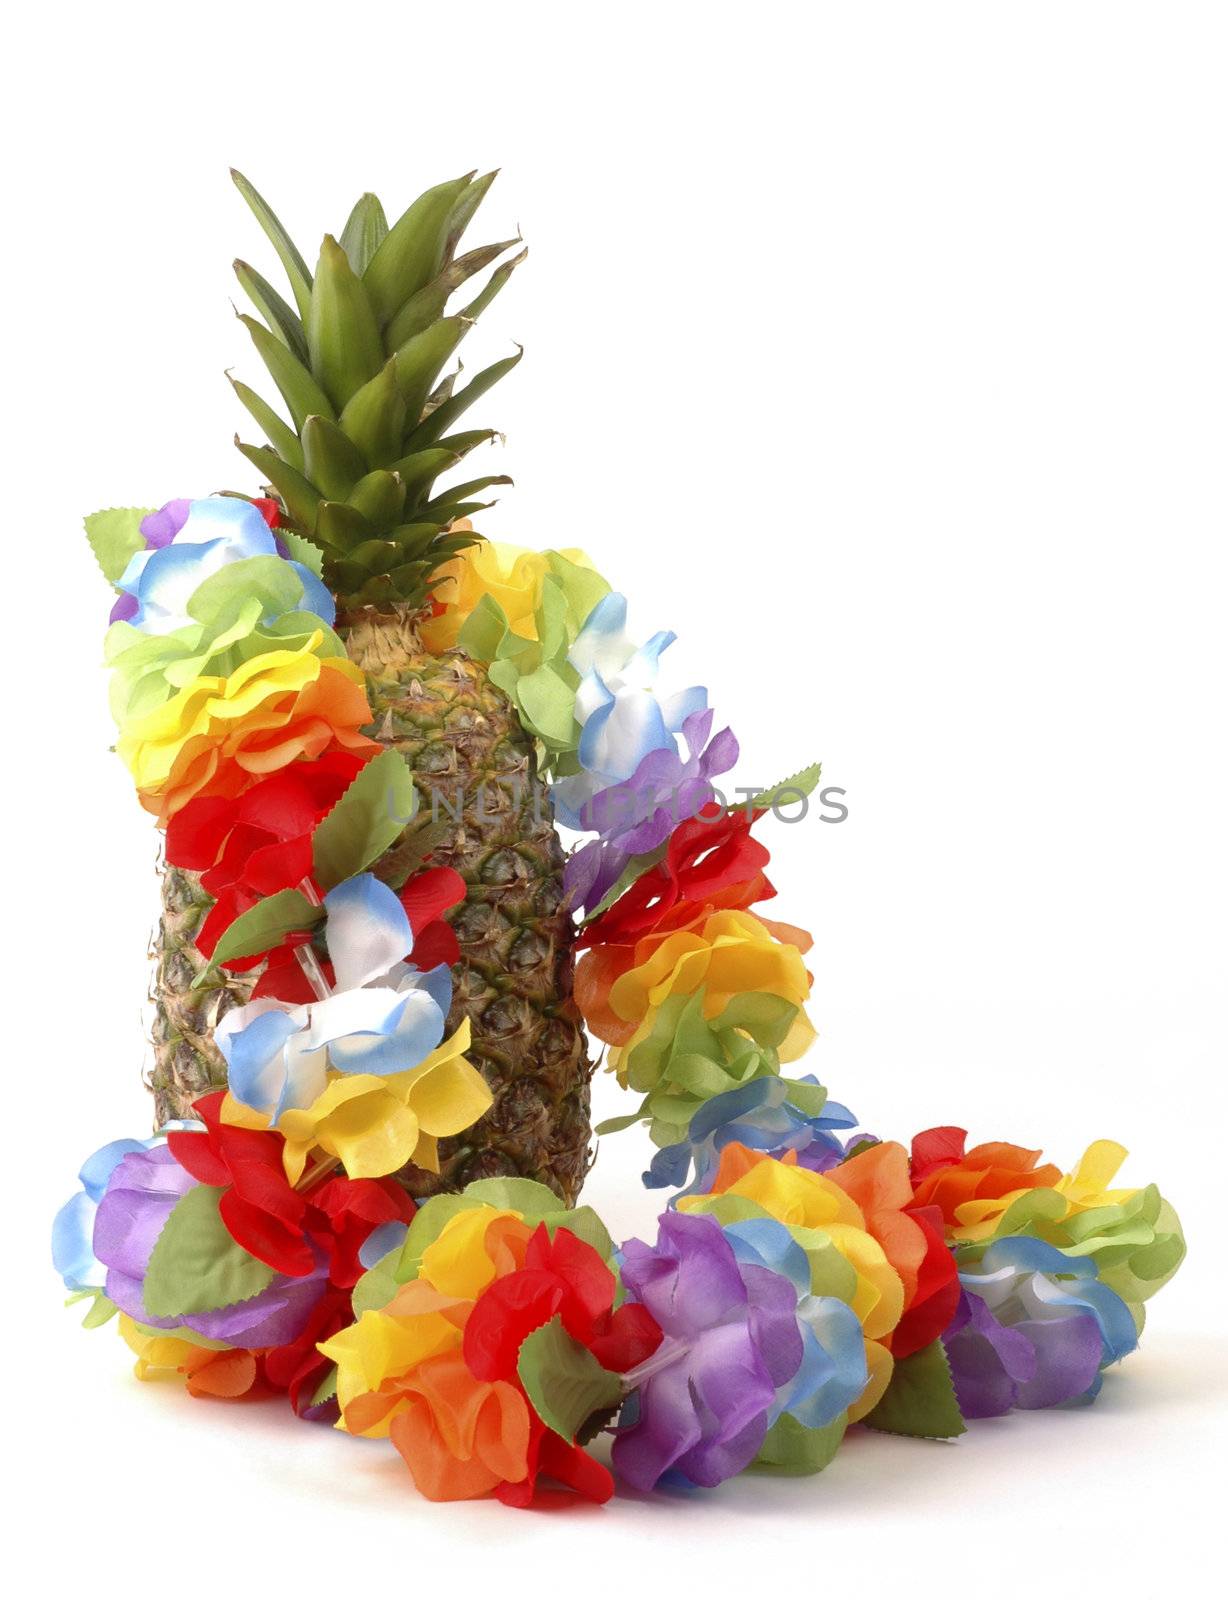 Colorful lei draped over a fresh pineapple.